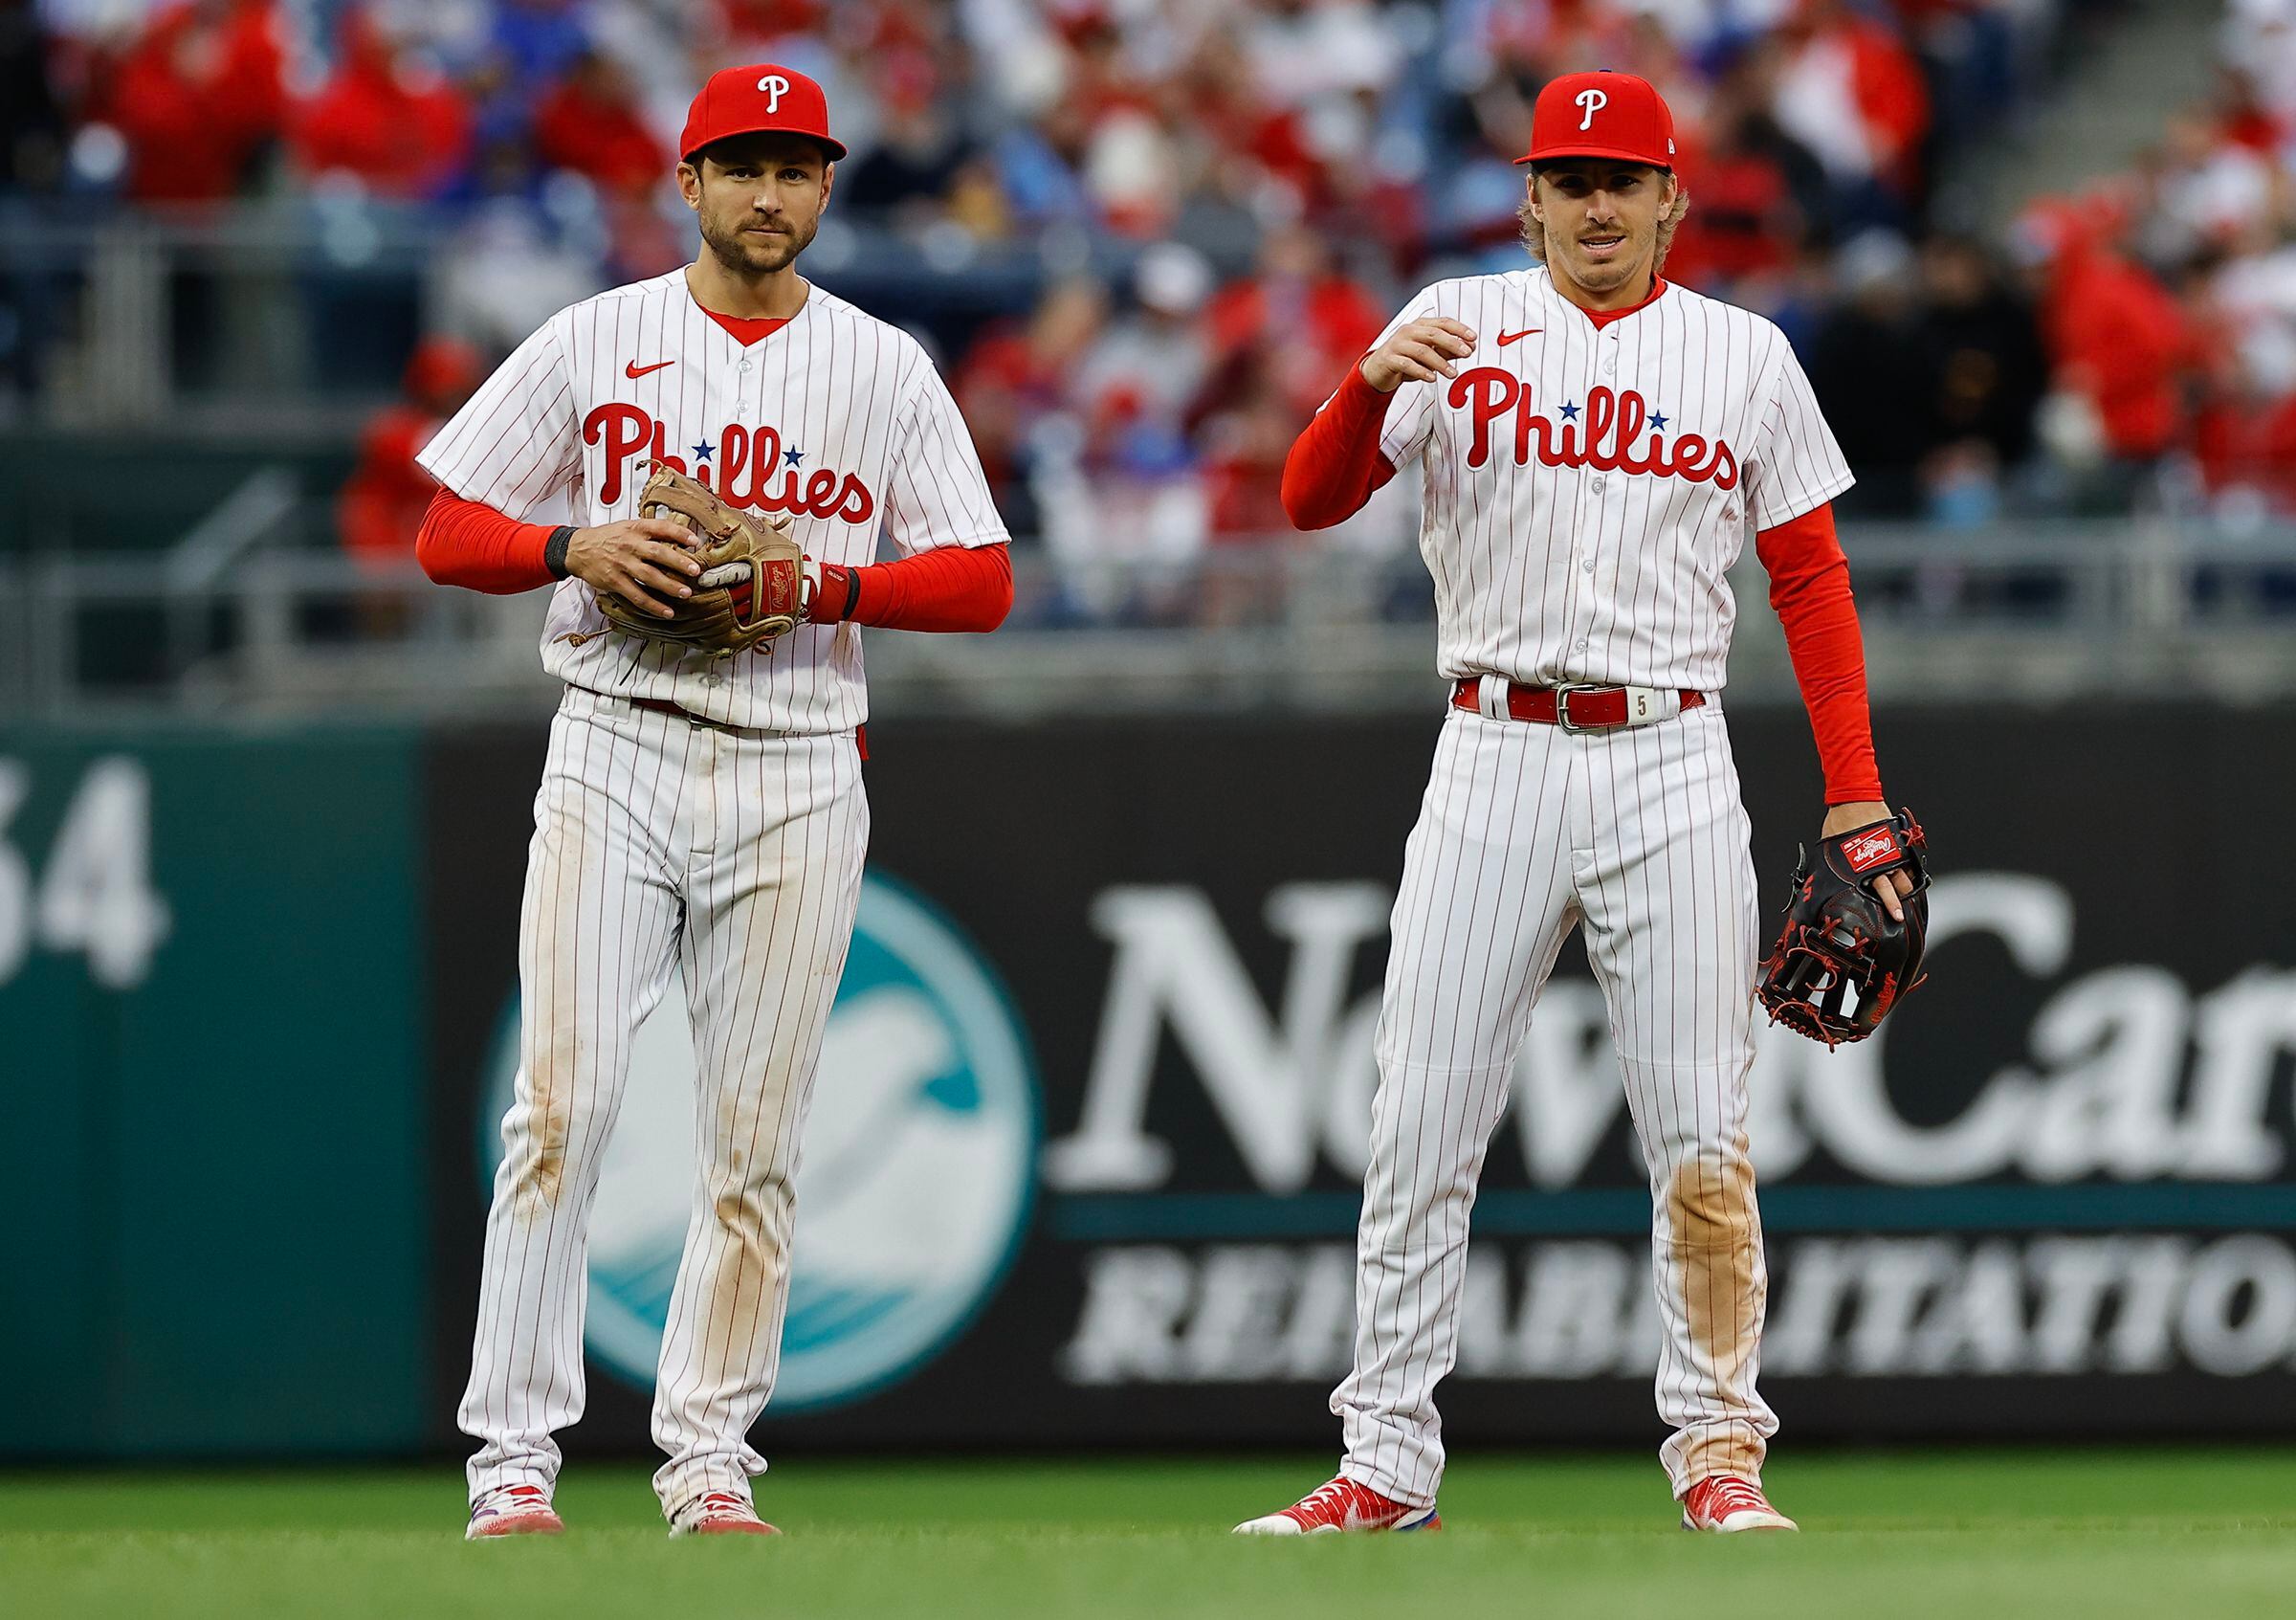 Win-Now Phillies Charge Ahead With $300 Million Deal for Trea